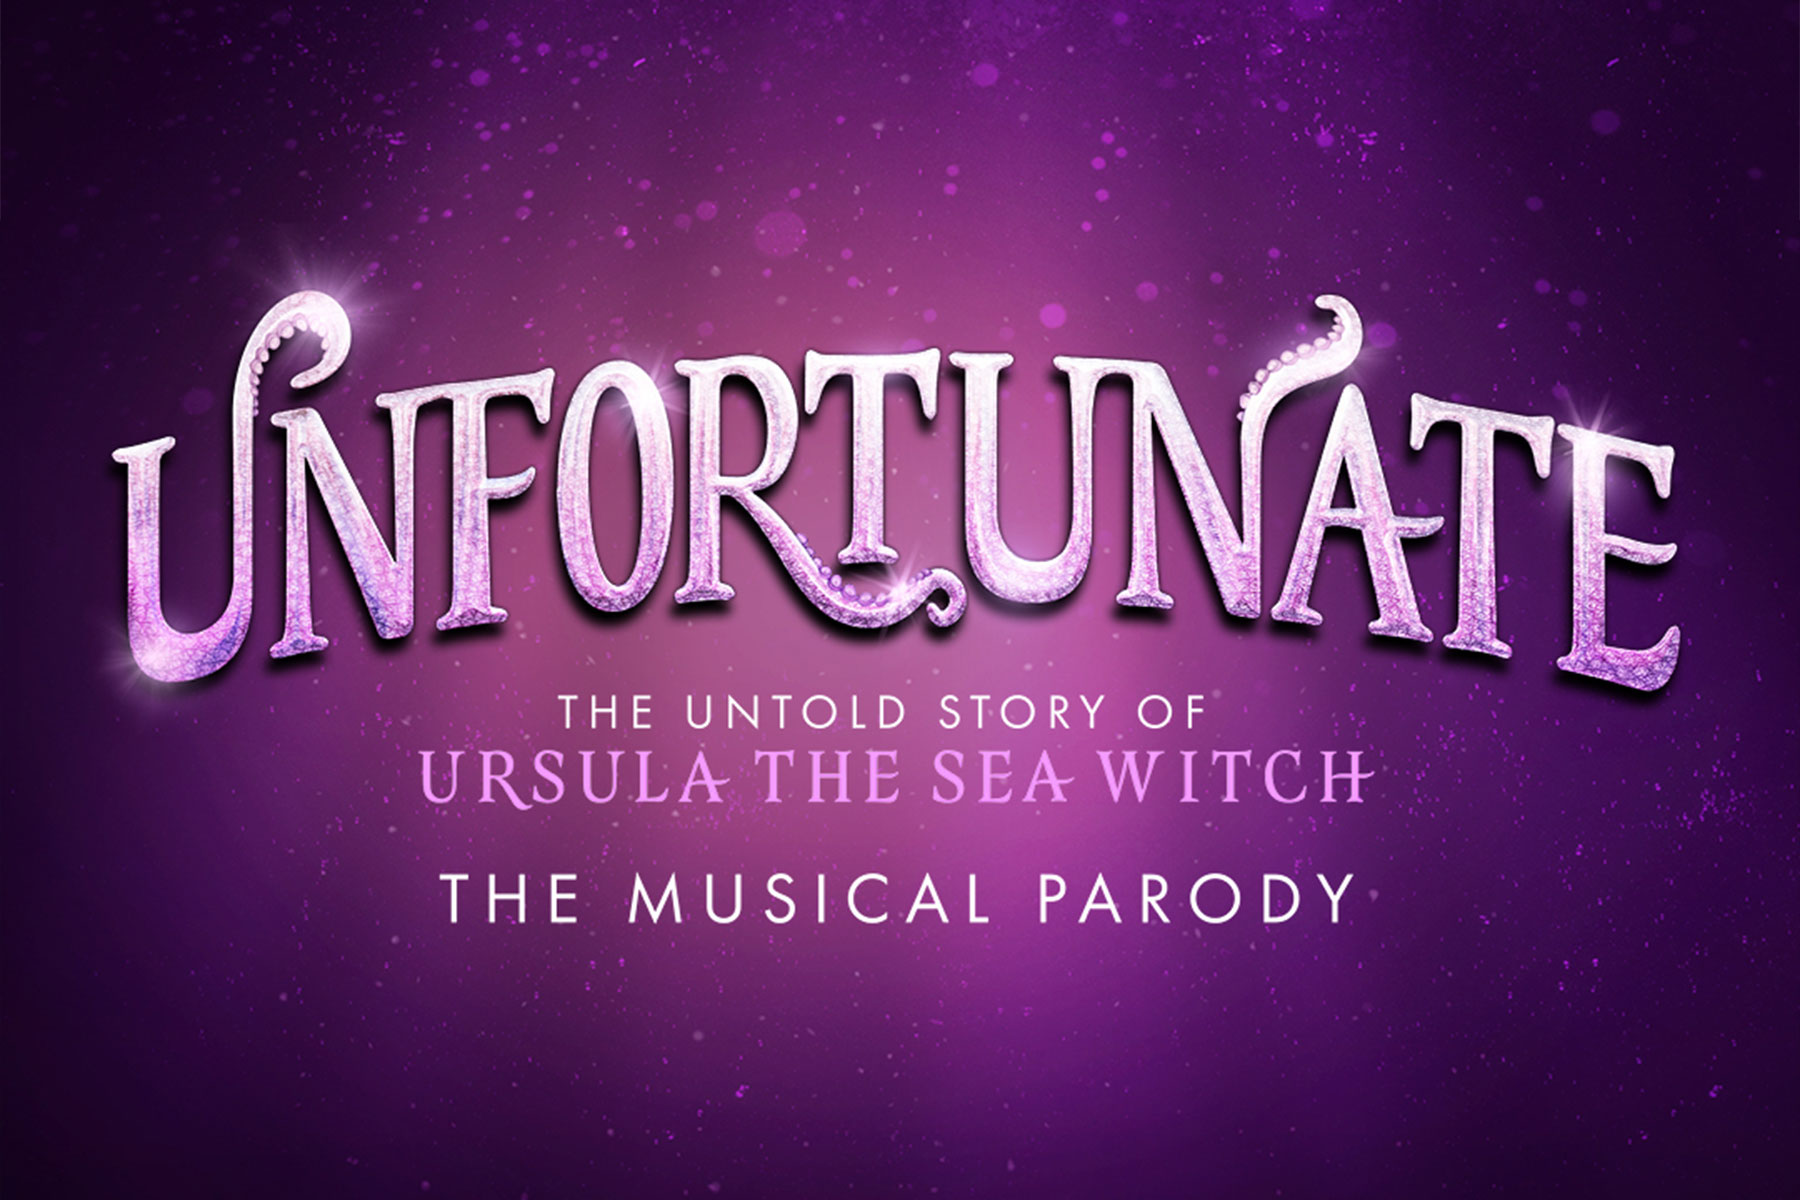 Artwork for Unfortunate: The Untold Story of Ursula the Sea Witch